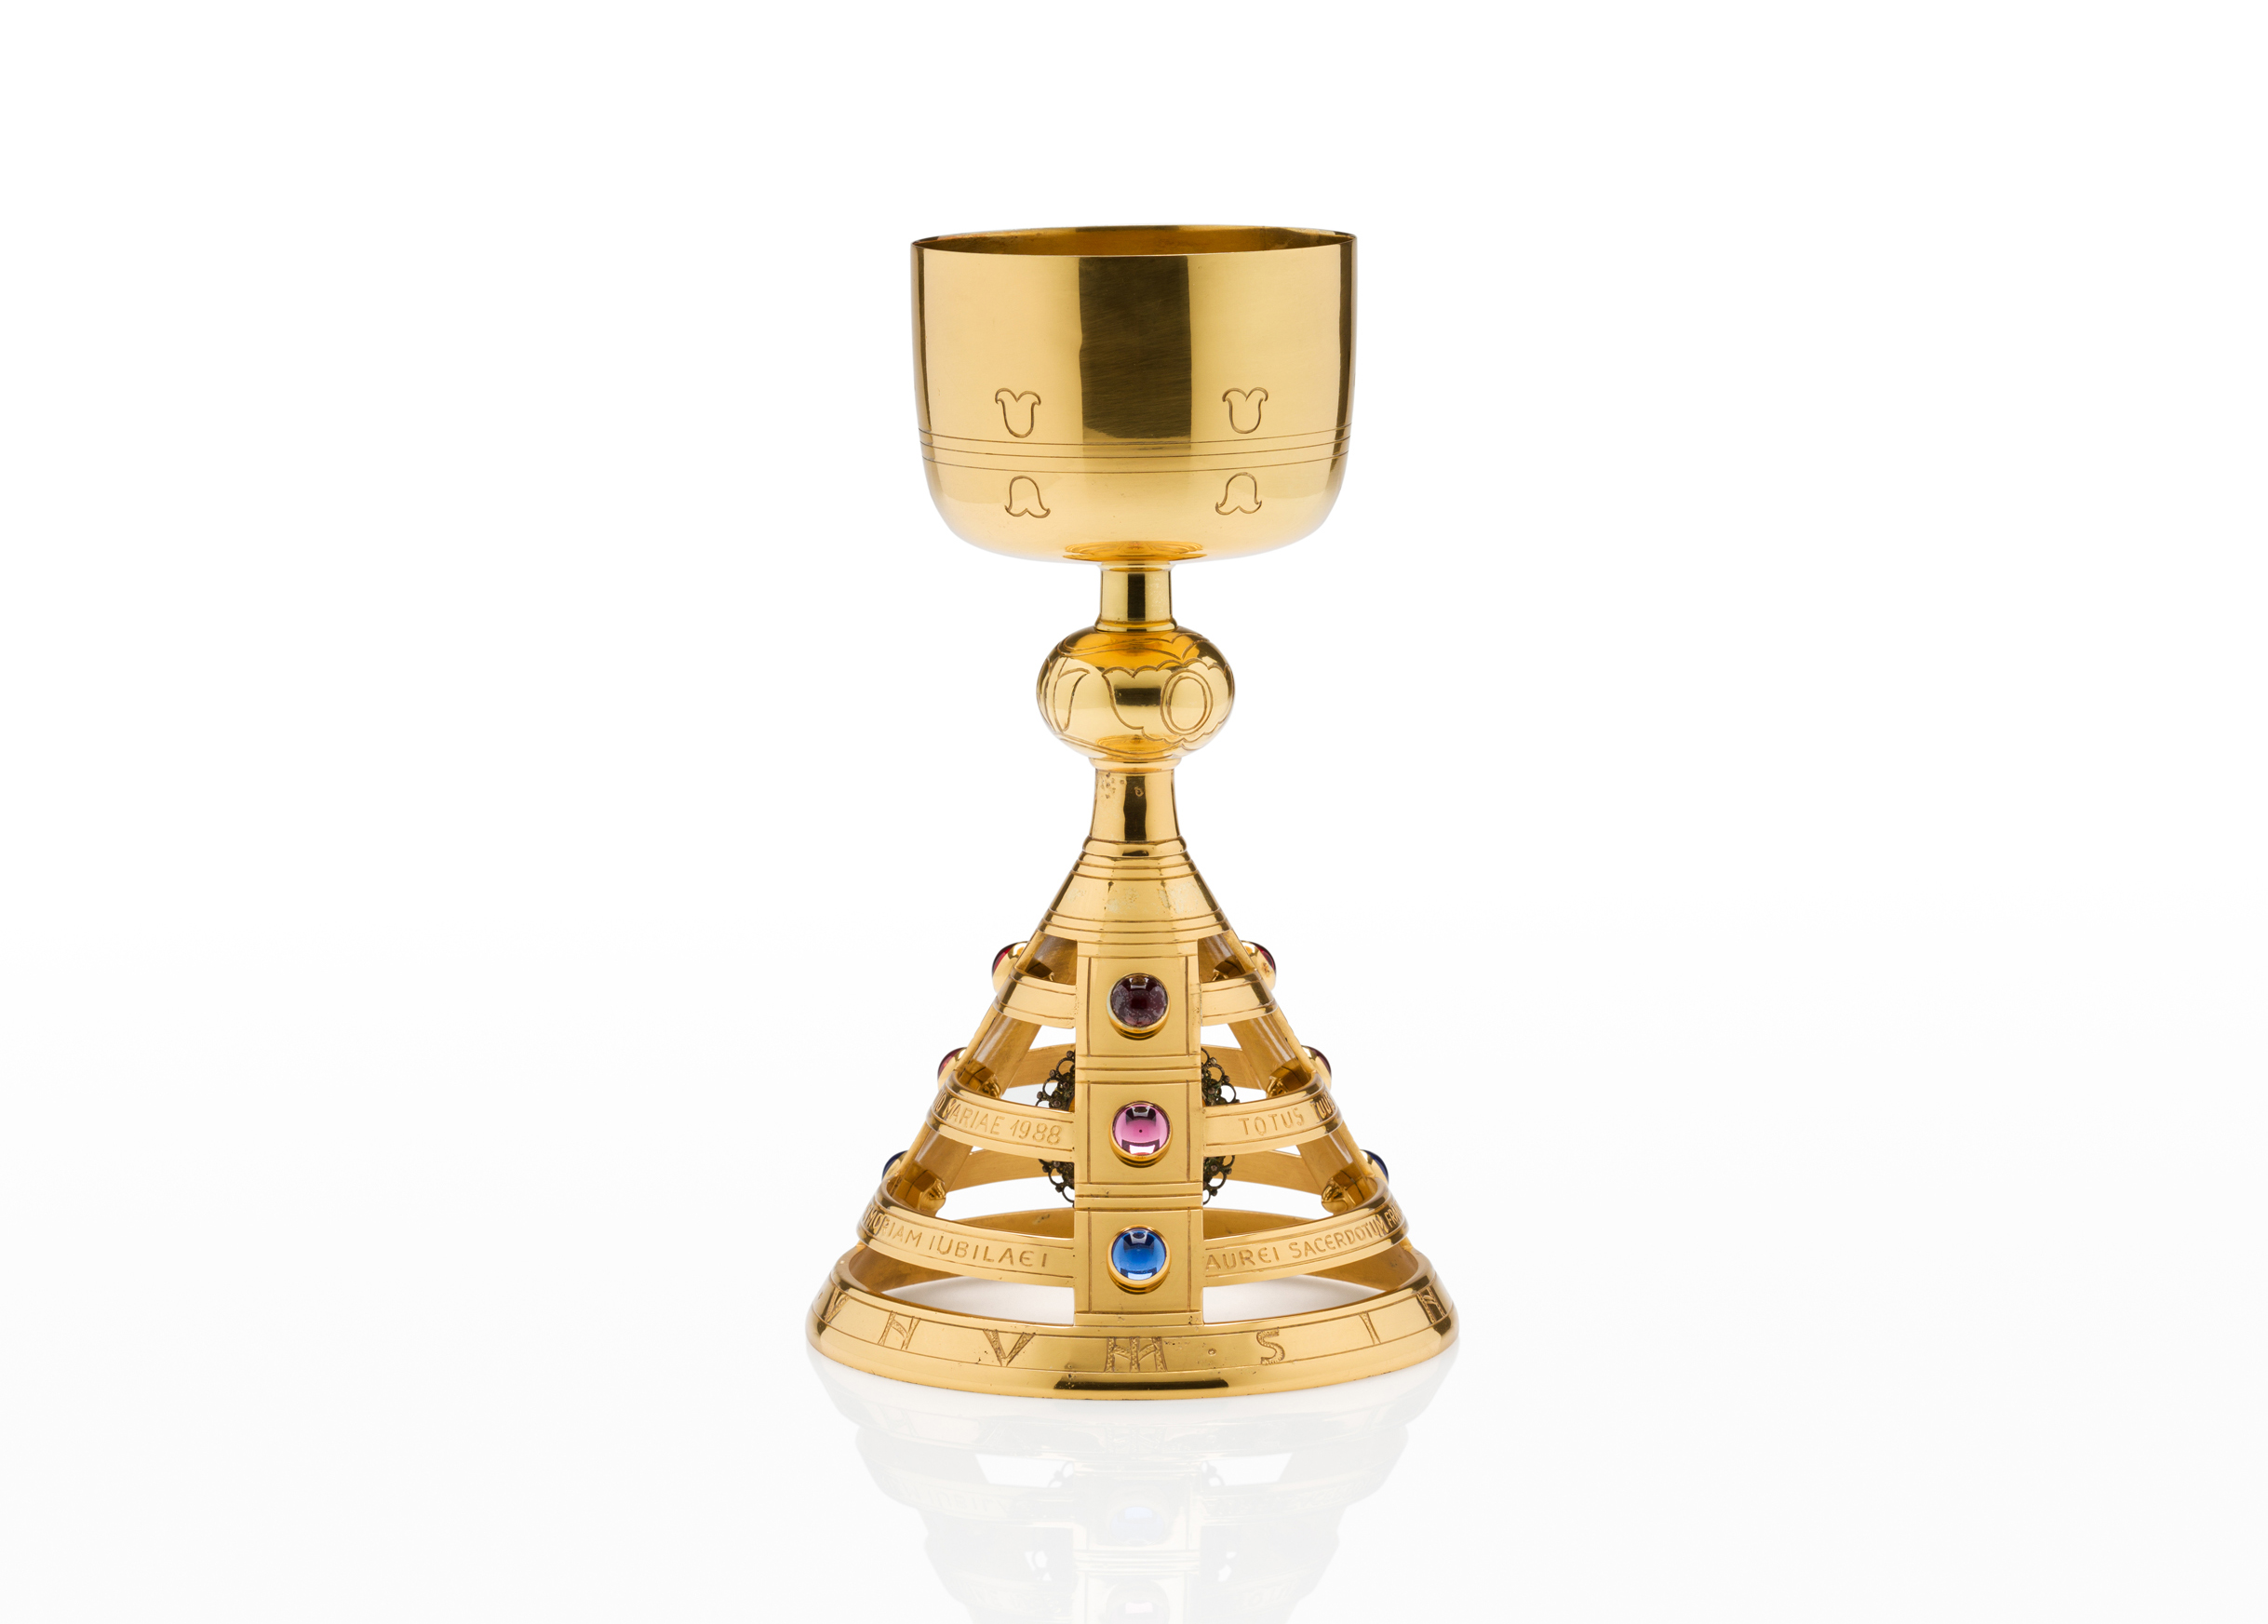 Škorjanc Chalice, 1951, silver, gold coin, coloured glass and various semiprecious stones